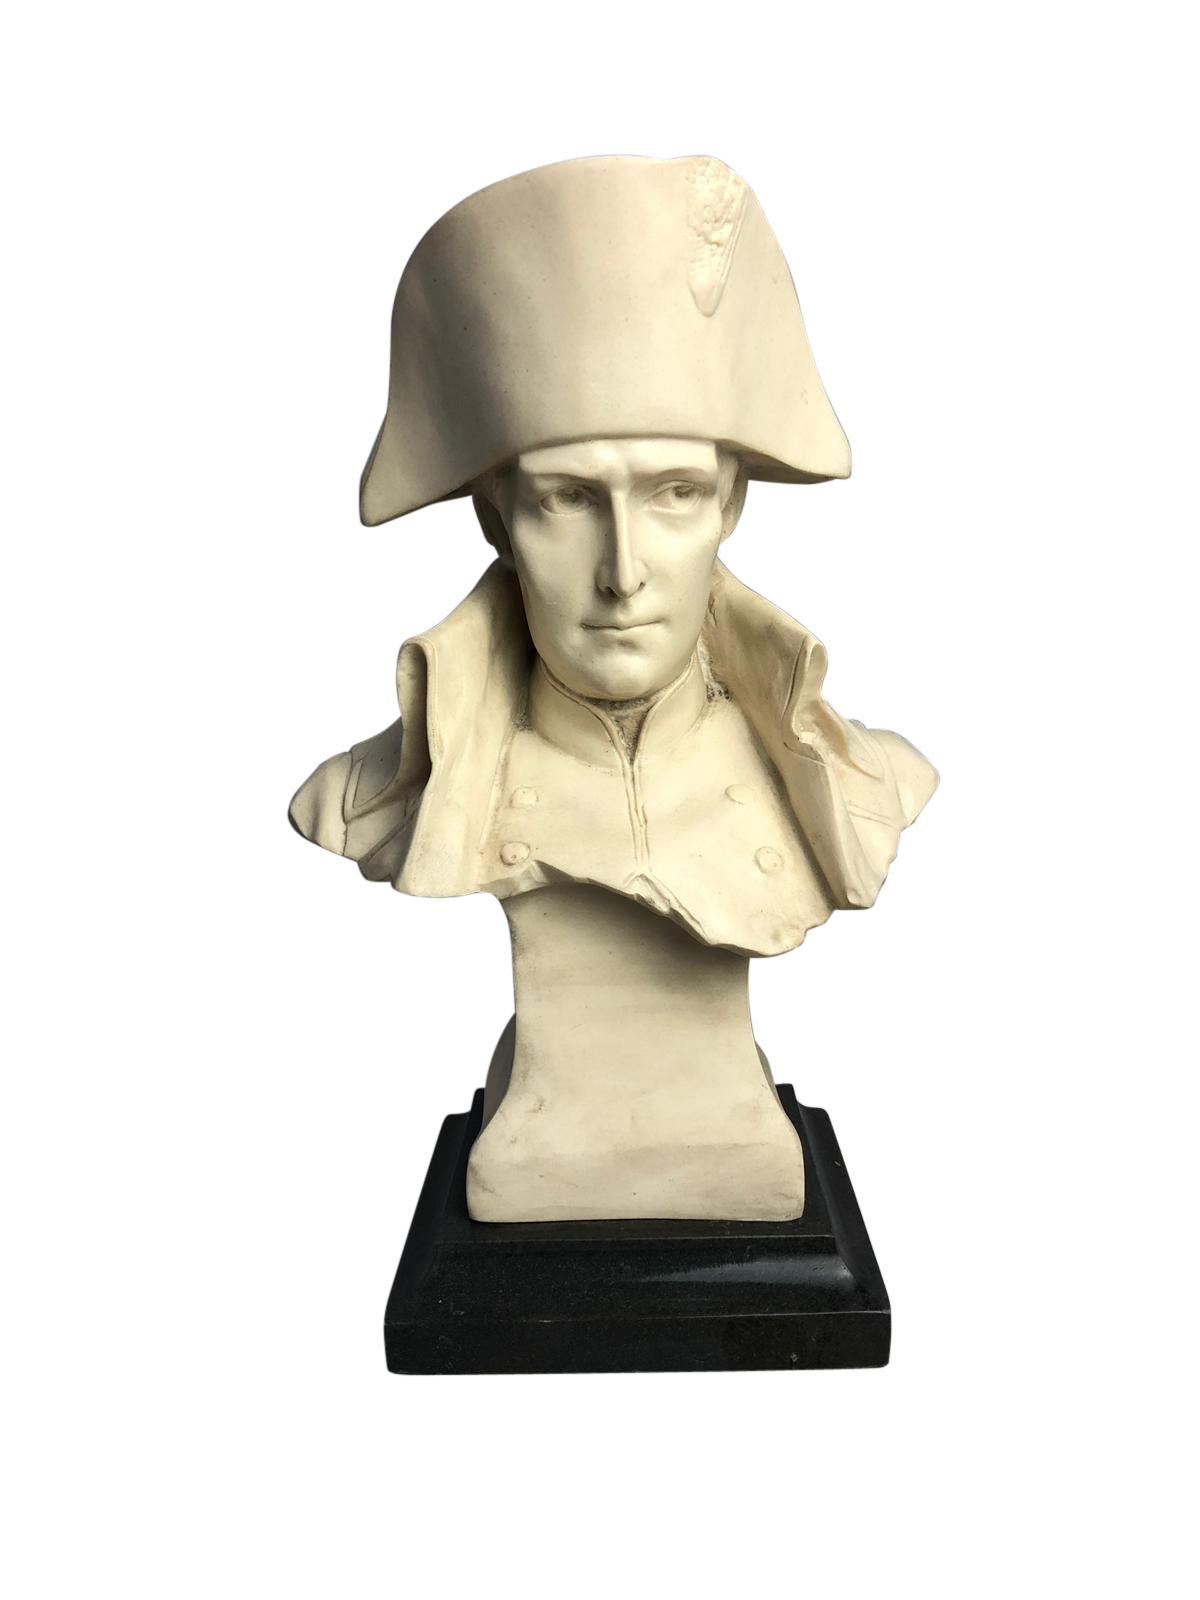 A wonderful 20th century French bust of Emperor Napoleon I. The artist has really captured the likeness of this great historical figure with skill.
Made from marble composite.